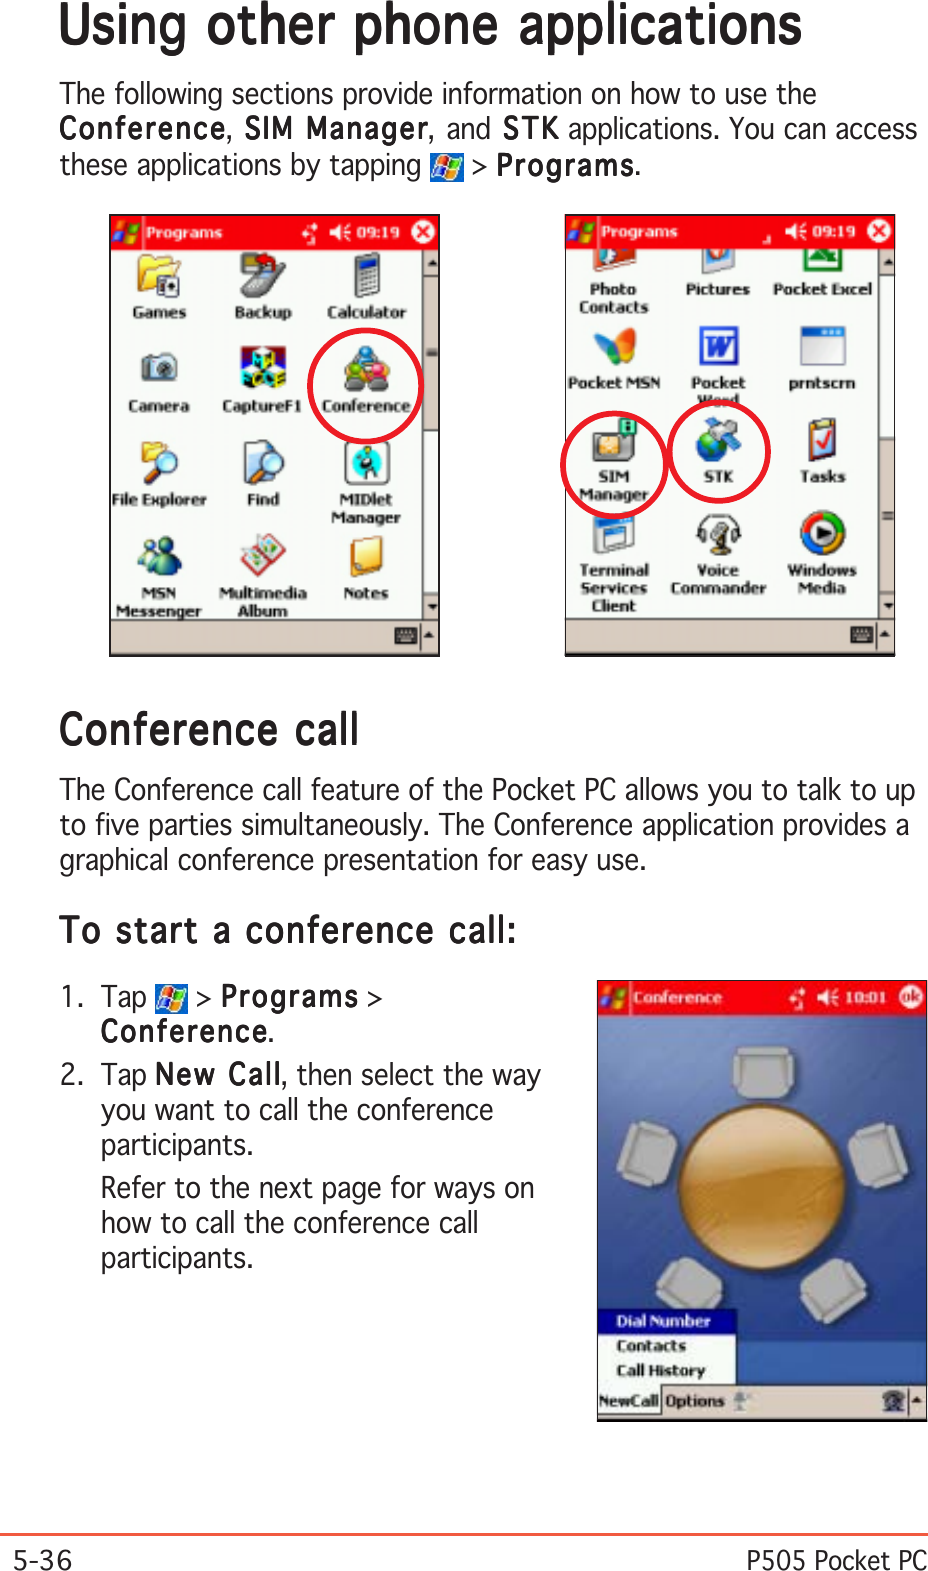 5-36P505 Pocket PCUsing other phone applicationsUsing other phone applicationsUsing other phone applicationsUsing other phone applicationsUsing other phone applicationsThe following sections provide information on how to use theConferenceConferenceConferenceConferenceConference, SIM Manager SIM Manager SIM Manager SIM Manager SIM Manager, and STK STK STK STK  S TK applications. You can accessthese applications by tapping   &gt; ProgramsProgramsProgramsProgramsPrograms.Conference callConference callConference callConference callConference callThe Conference call feature of the Pocket PC allows you to talk to upto five parties simultaneously. The Conference application provides agraphical conference presentation for easy use.To start a conference call:To start a conference call:To start a conference call:To start a conference call:To start a conference call:1. Tap   &gt; ProgramsProgramsProgramsProgramsPrograms &gt;ConferenceConferenceConferenceConferenceConference.2. Tap New CallNew CallNew CallNew CallNew Call, then select the wayyou want to call the conferenceparticipants.Refer to the next page for ways onhow to call the conference callparticipants.